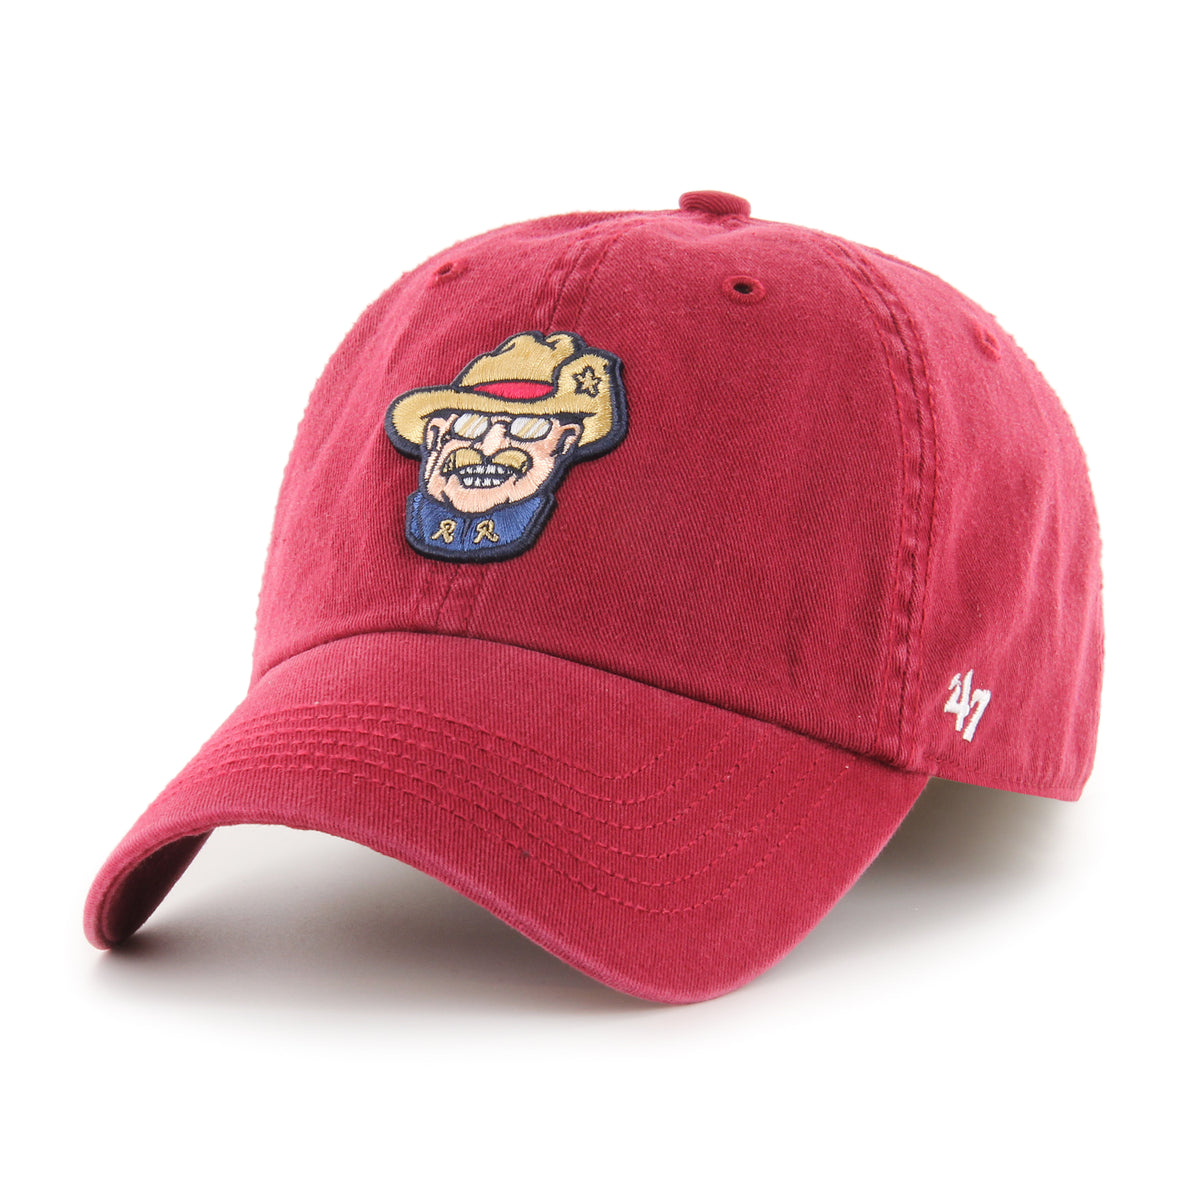 FRISCO ROUGHRIDERS CLASSIC '47 FRANCHISE